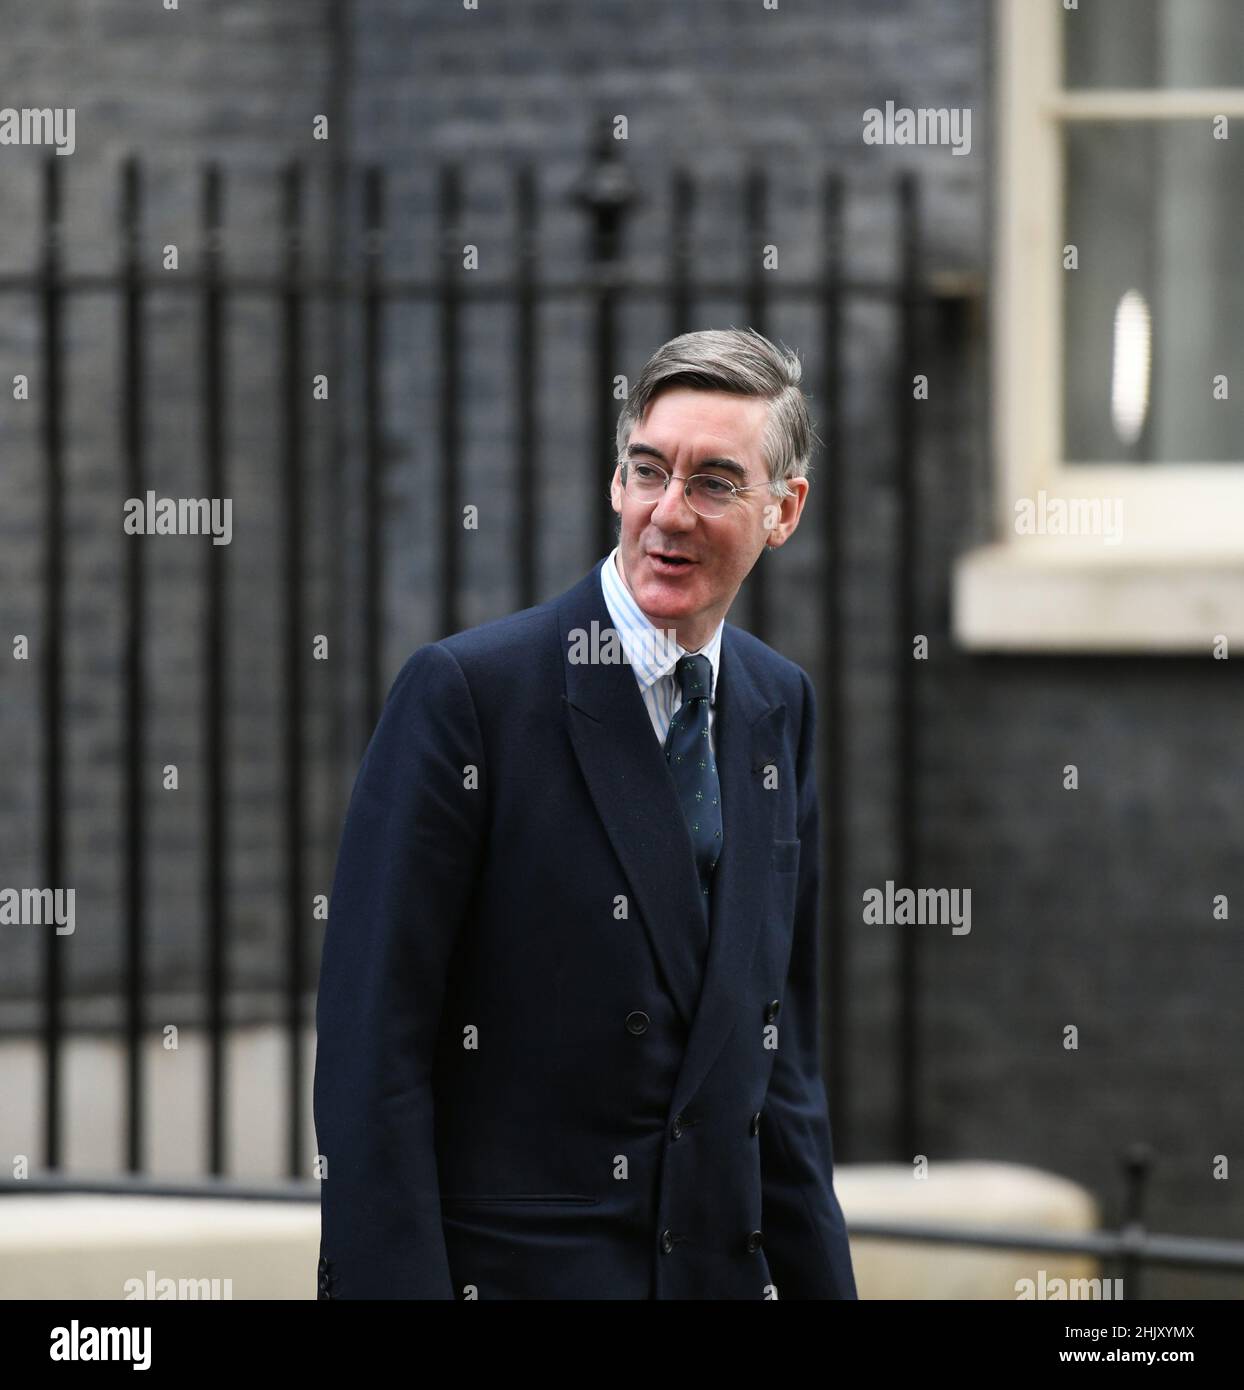 Downing Street, London, Großbritannien. 1. Februar 2022. Jacob Rees-Mogg MP, Lord President of the Council, Leader of the Commons in Downing Street für wöchentliche Kabinettssitzung. Quelle: Malcolm Park/Alamy Live News. Stockfoto